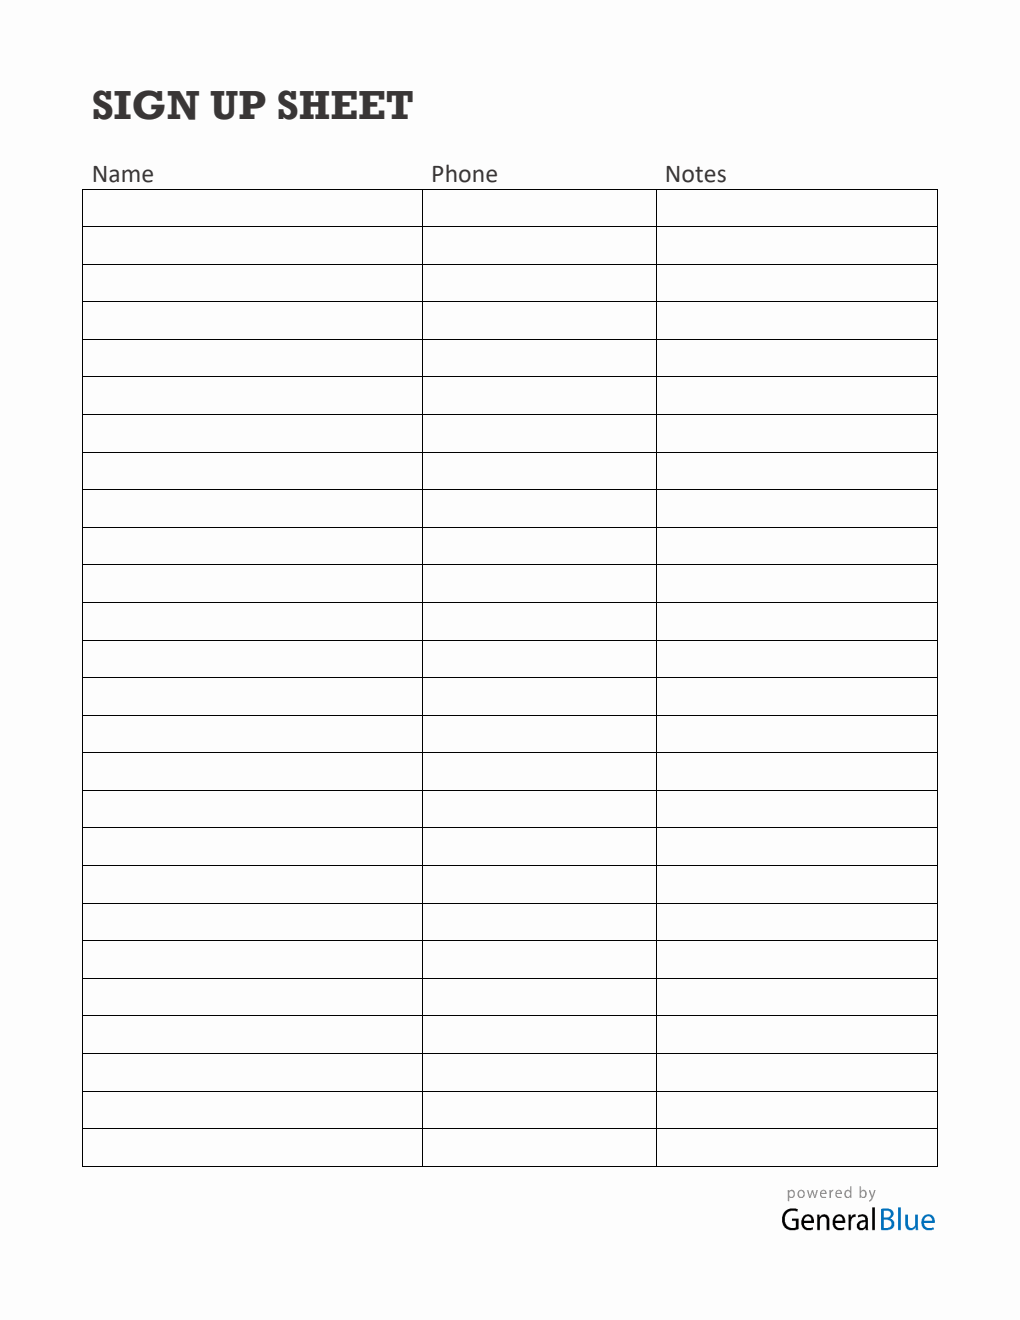 Blank Sign-Up Sheet in PDF